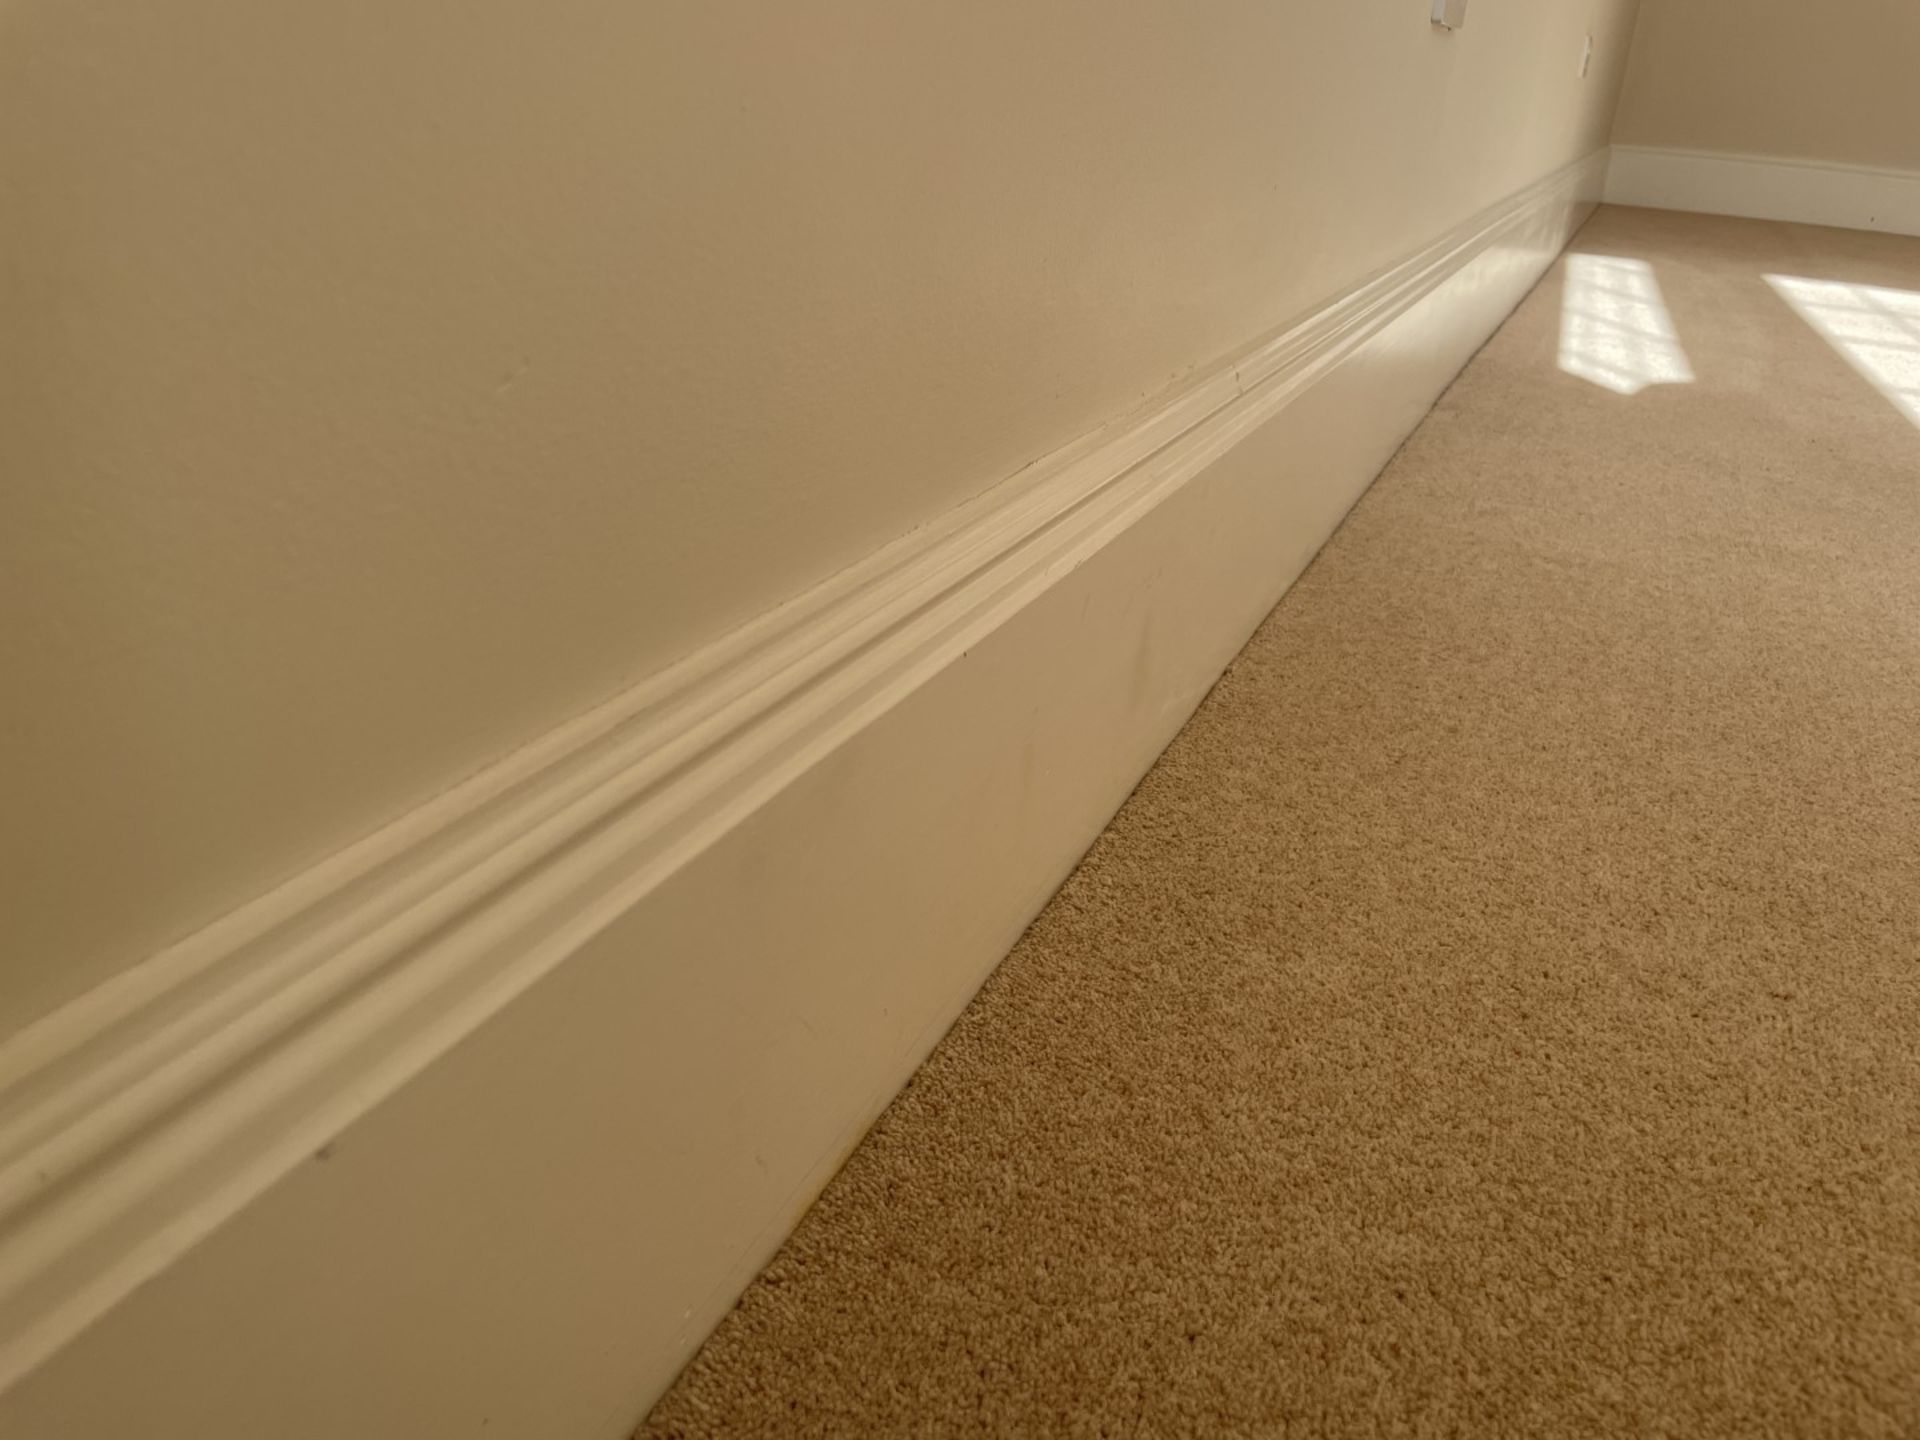 22-Metres of Painted Timber Wooden Skirting Boards, in White - Ref: PAN244 / Bed 2 - CL896 - NO - Image 2 of 6